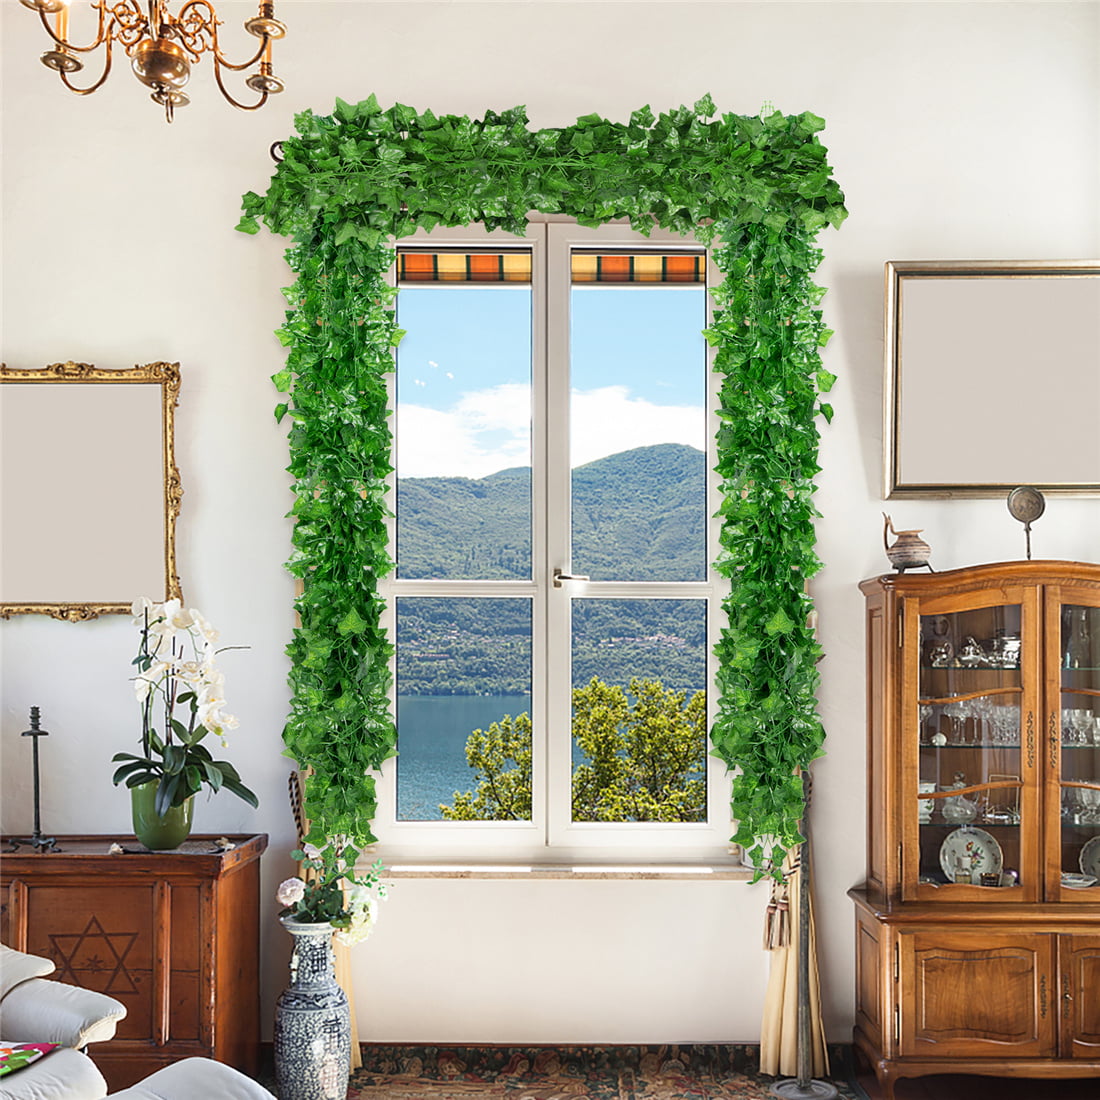 Bulk Faux Greenery Aesthetic Room Decor Artificial Plants LED Ivy Garland  Fake Leaf Vines Hanging For Home Living Decoration Bedroom 221122 From  Cong08, $12.68